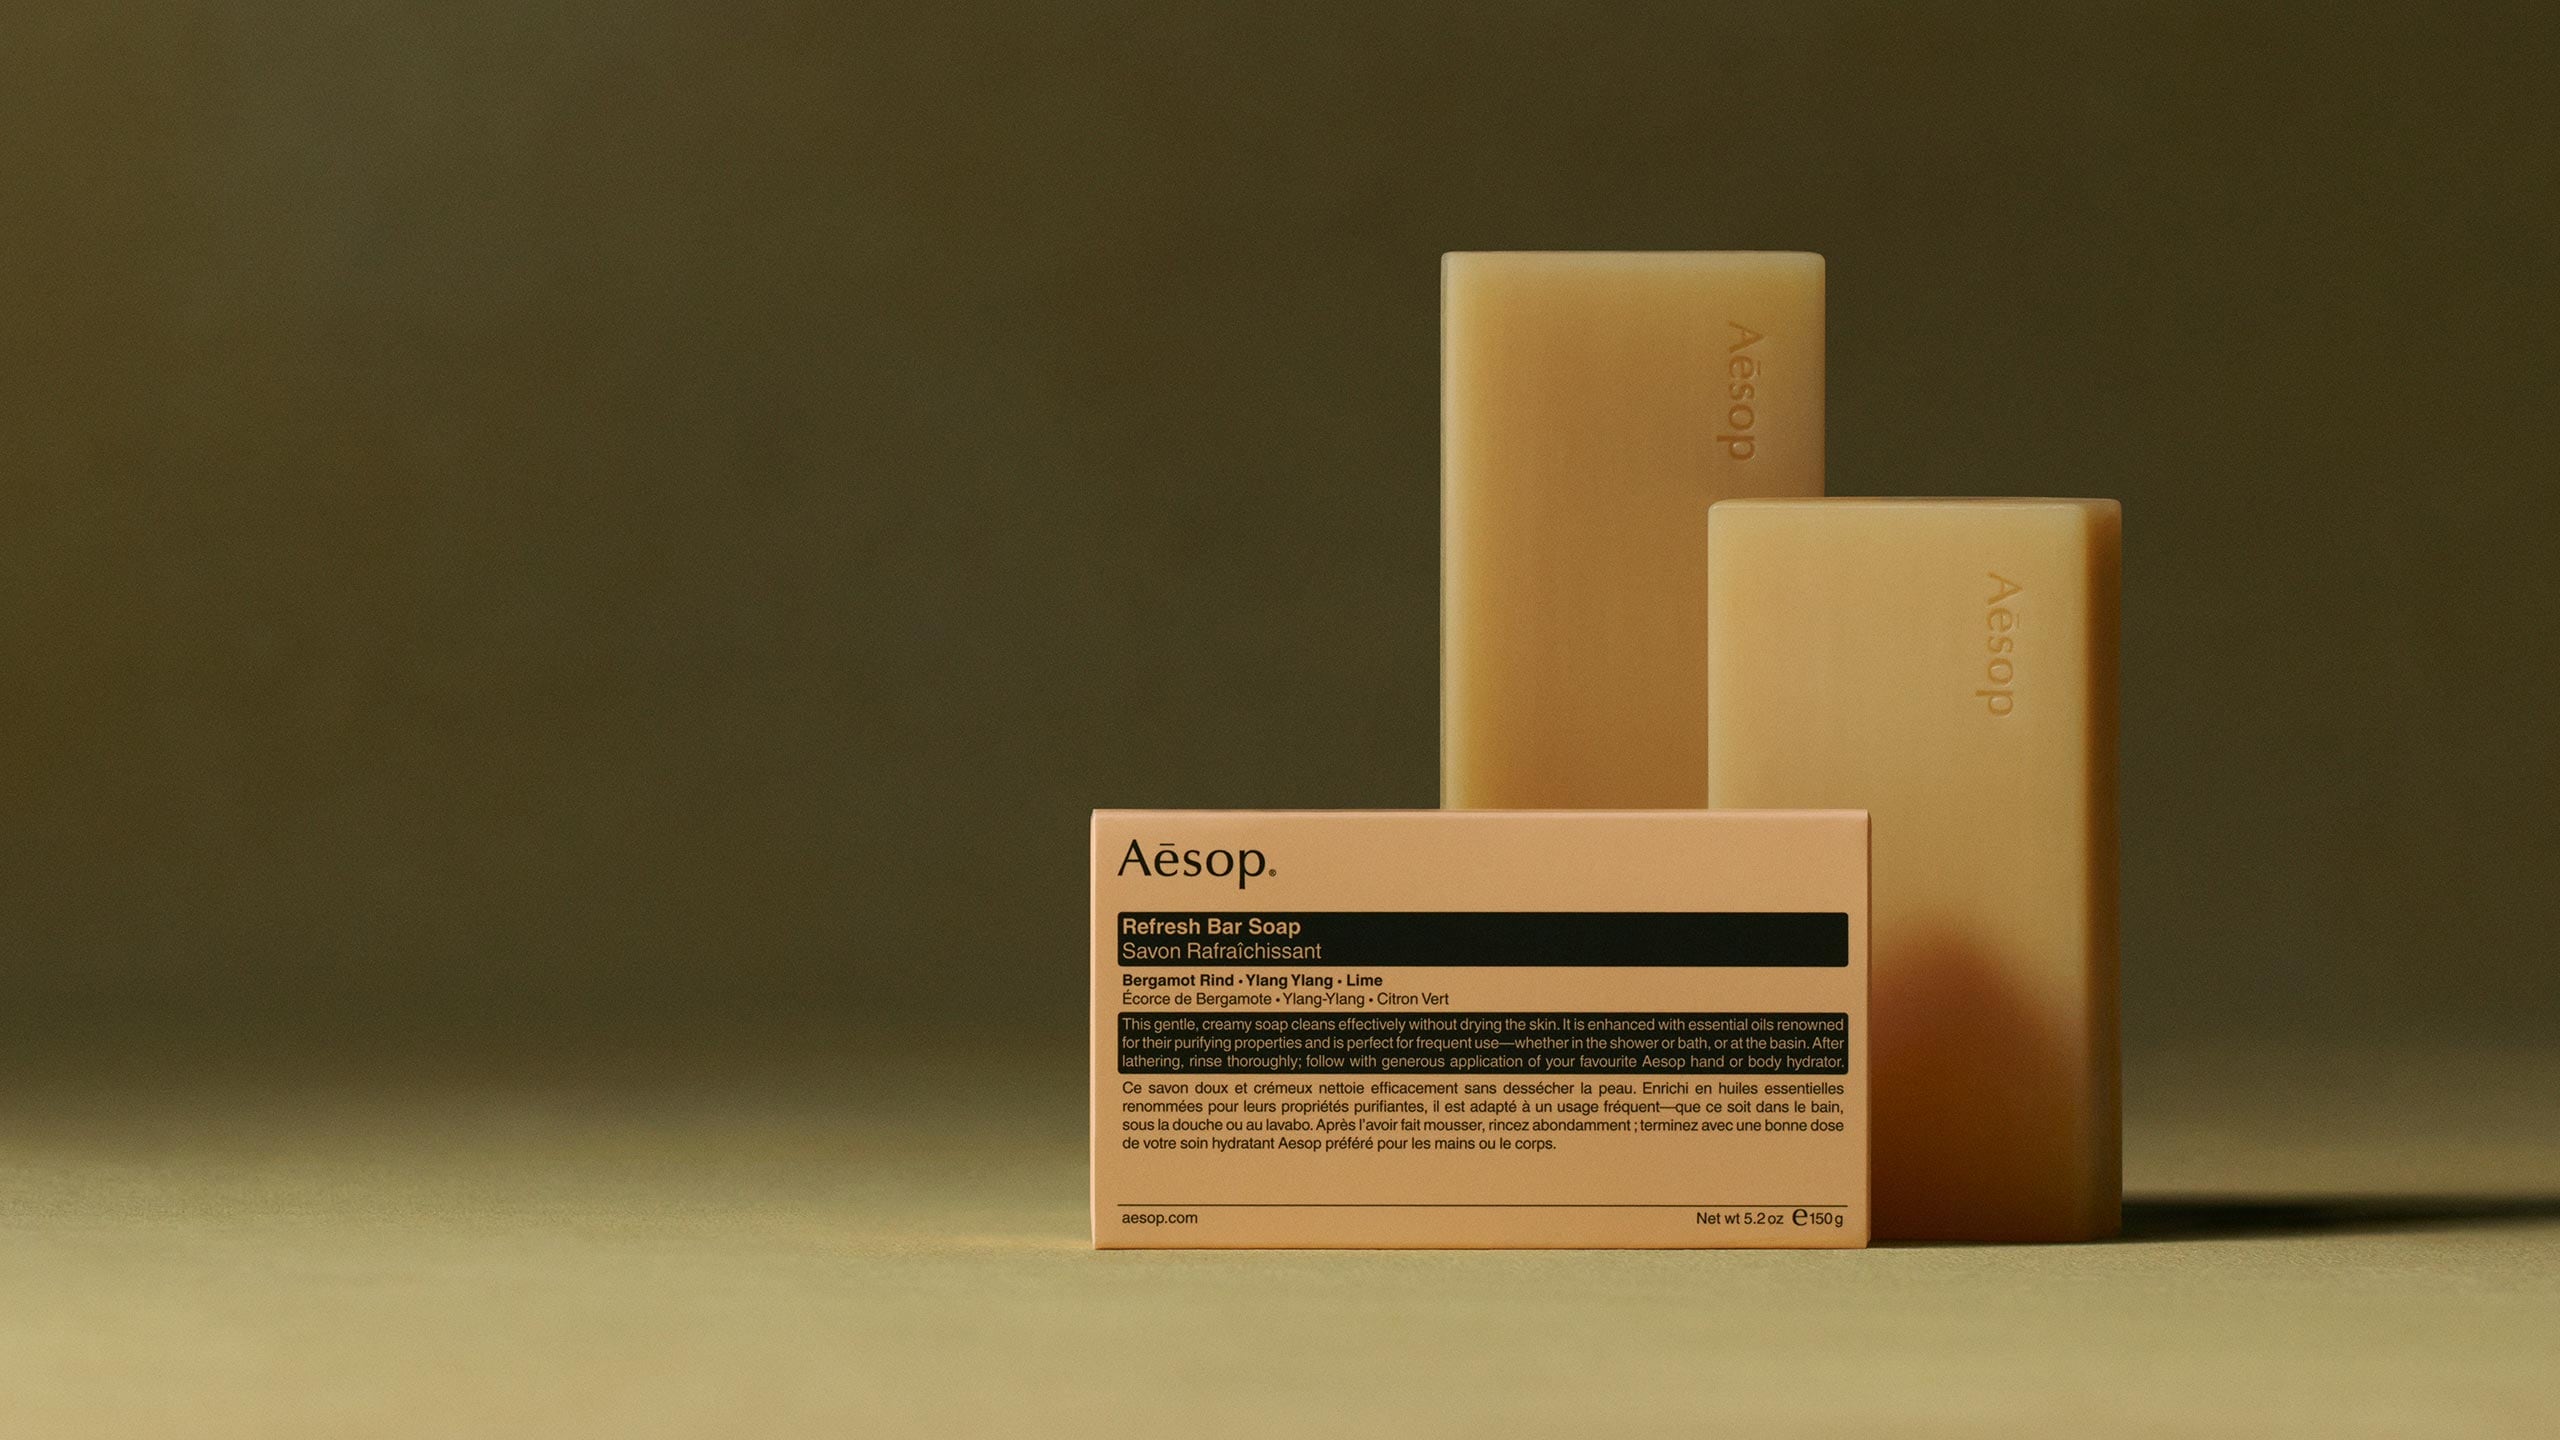 Aesop refresh bar soap and its packaging placed in front of a green textured background